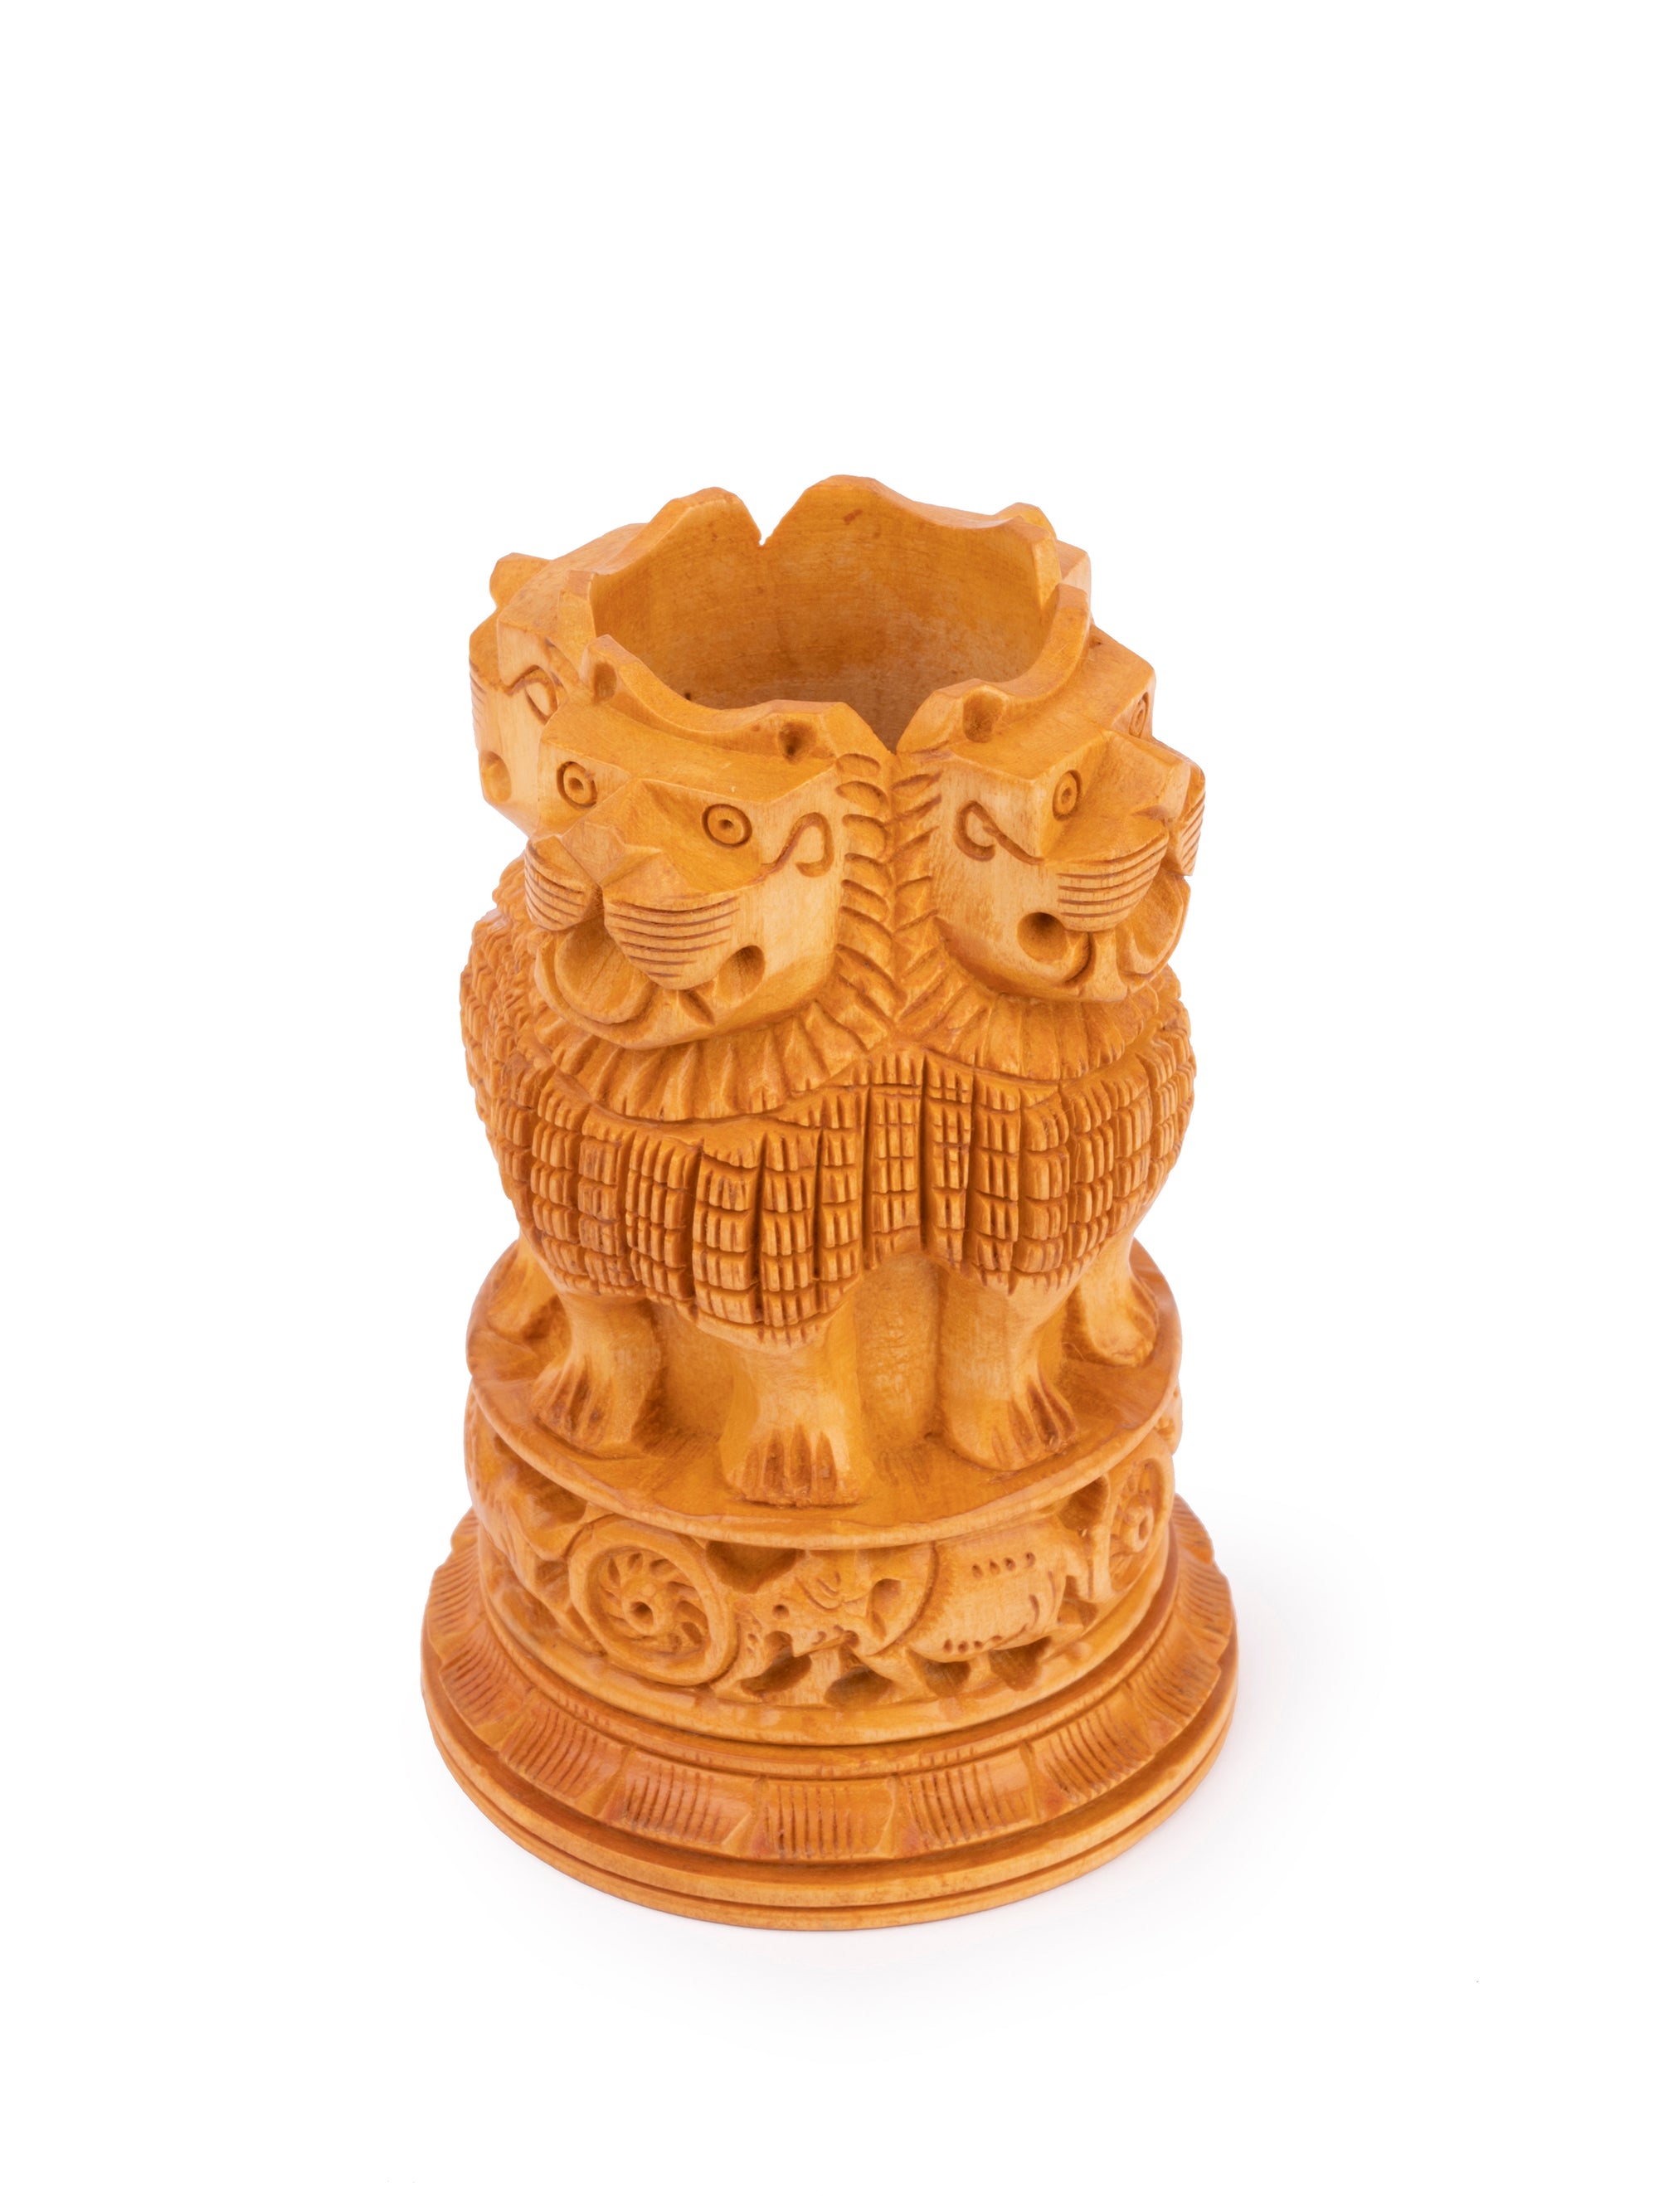 Kadam wood carved Ashok Stambh Pen / Pencil holder - 4 inches height - The Heritage Artifacts